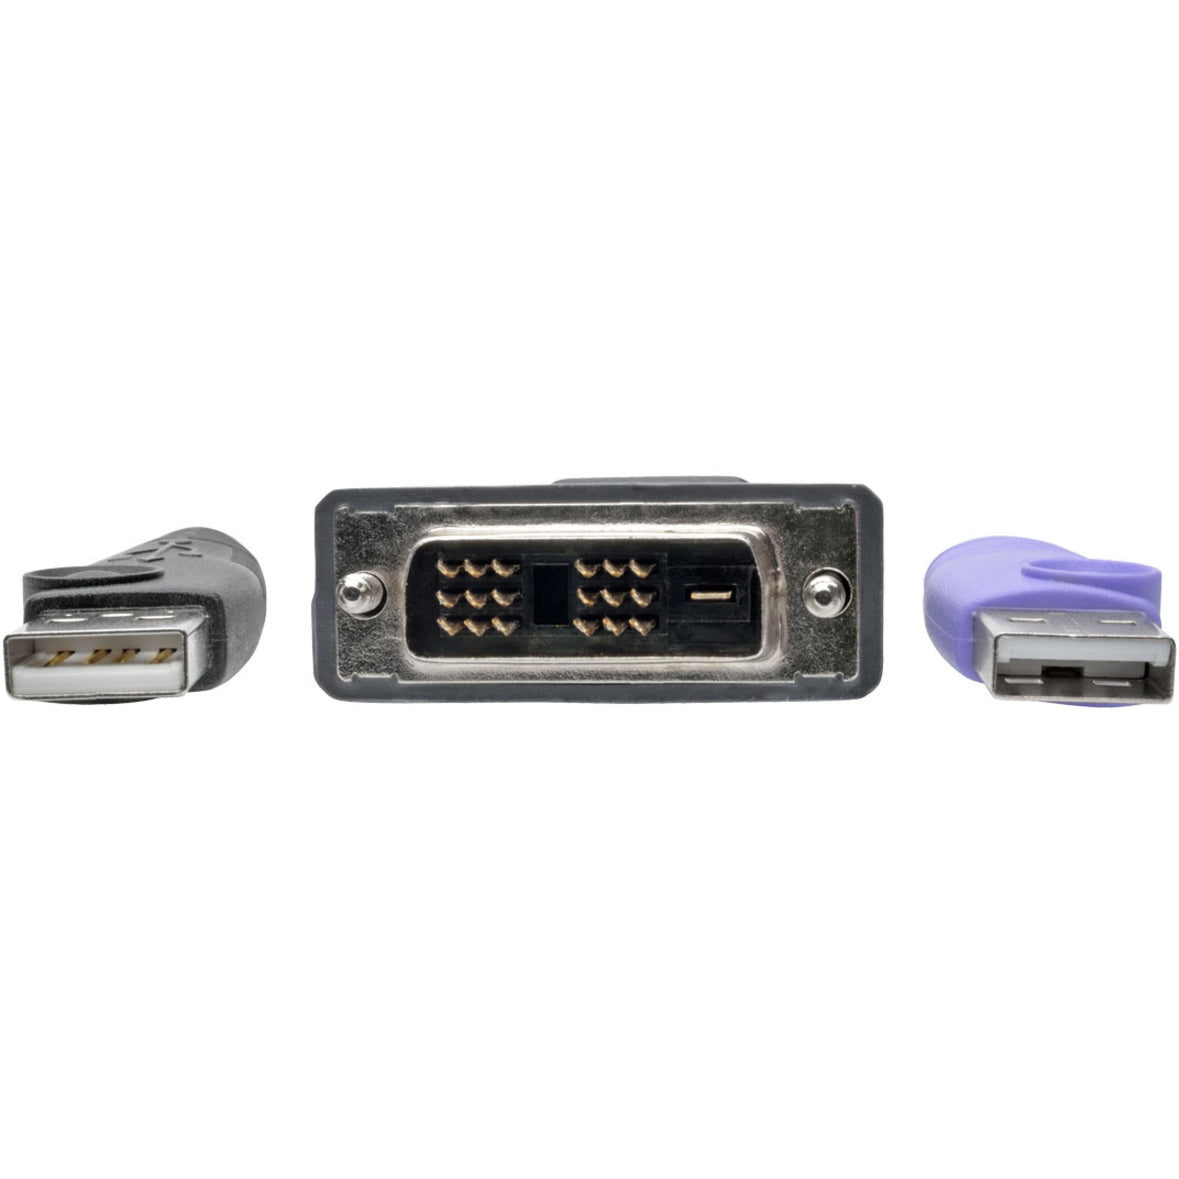 Tripp Lite NetDirector DVI USB Server Interface Unit with Virtual Media and CAC Support (B064-IPG Series) USB and DVI